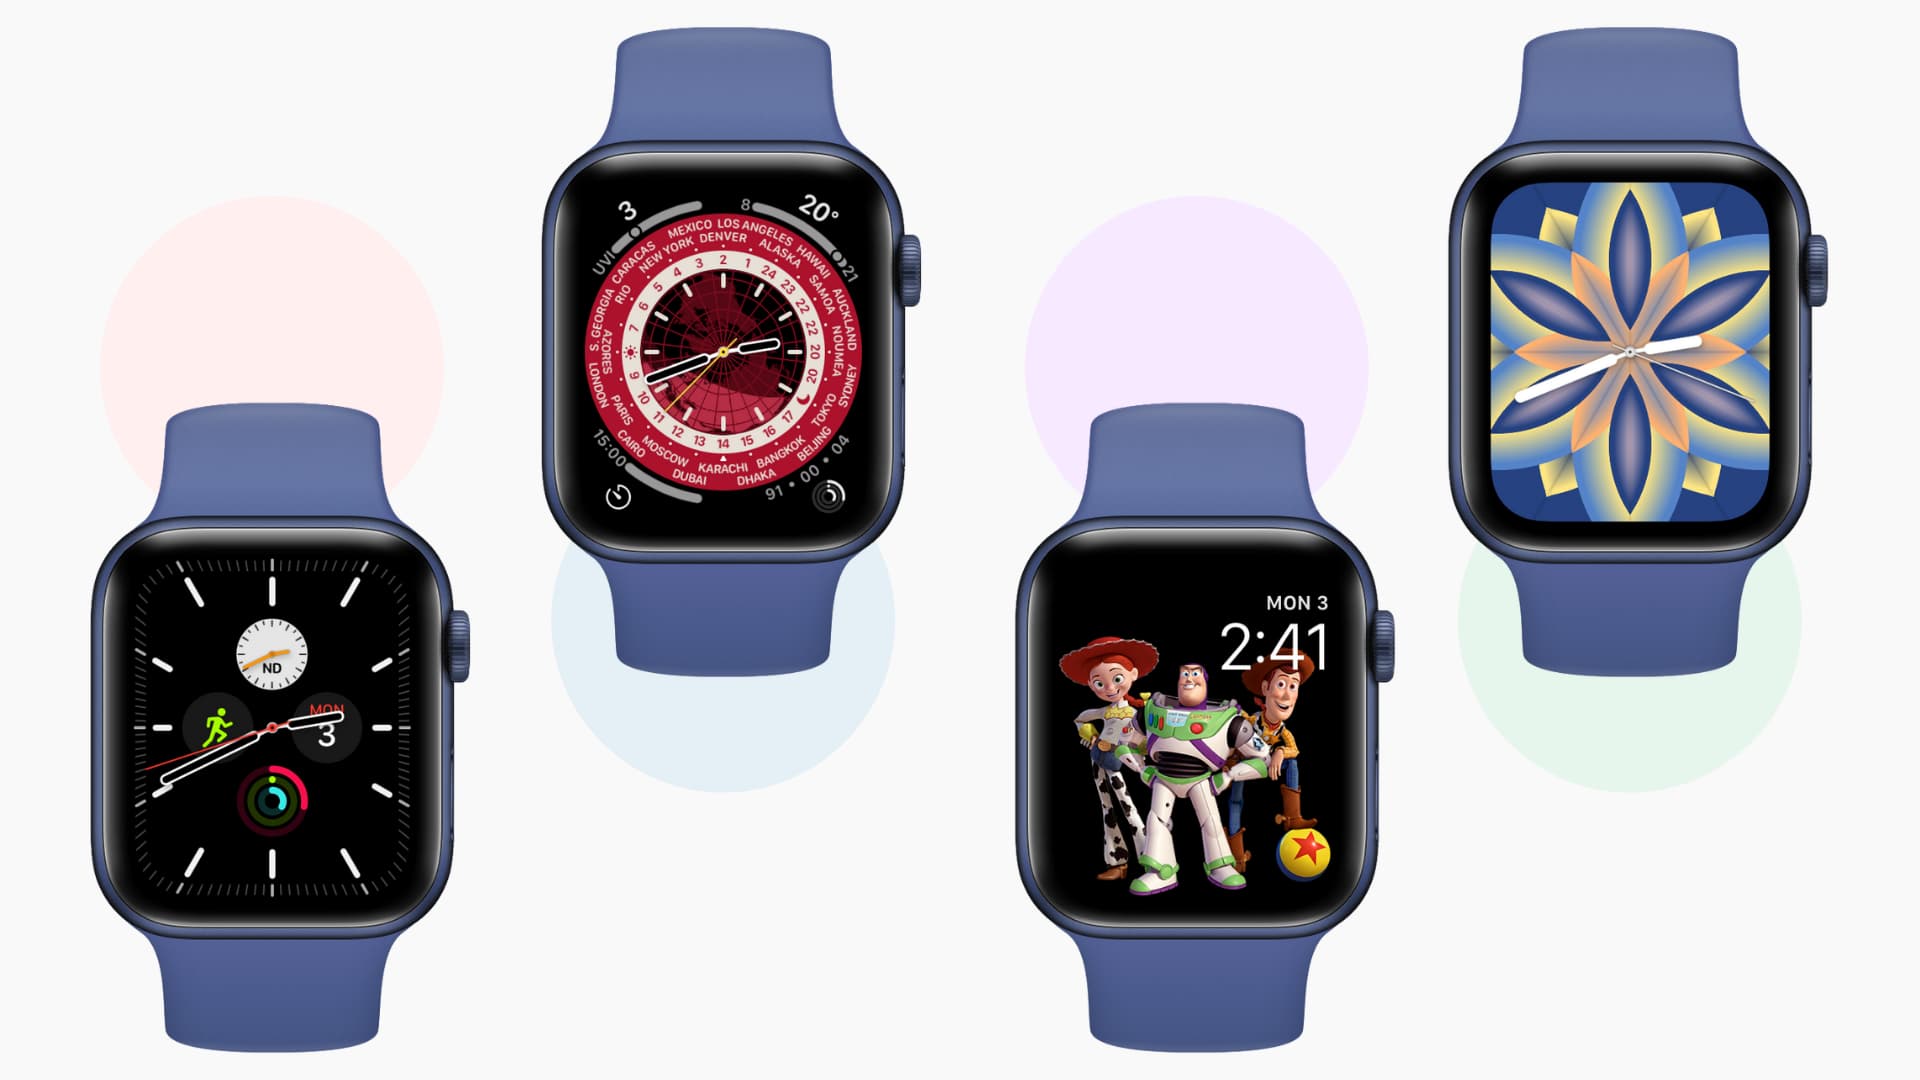 Apple Watch features faces